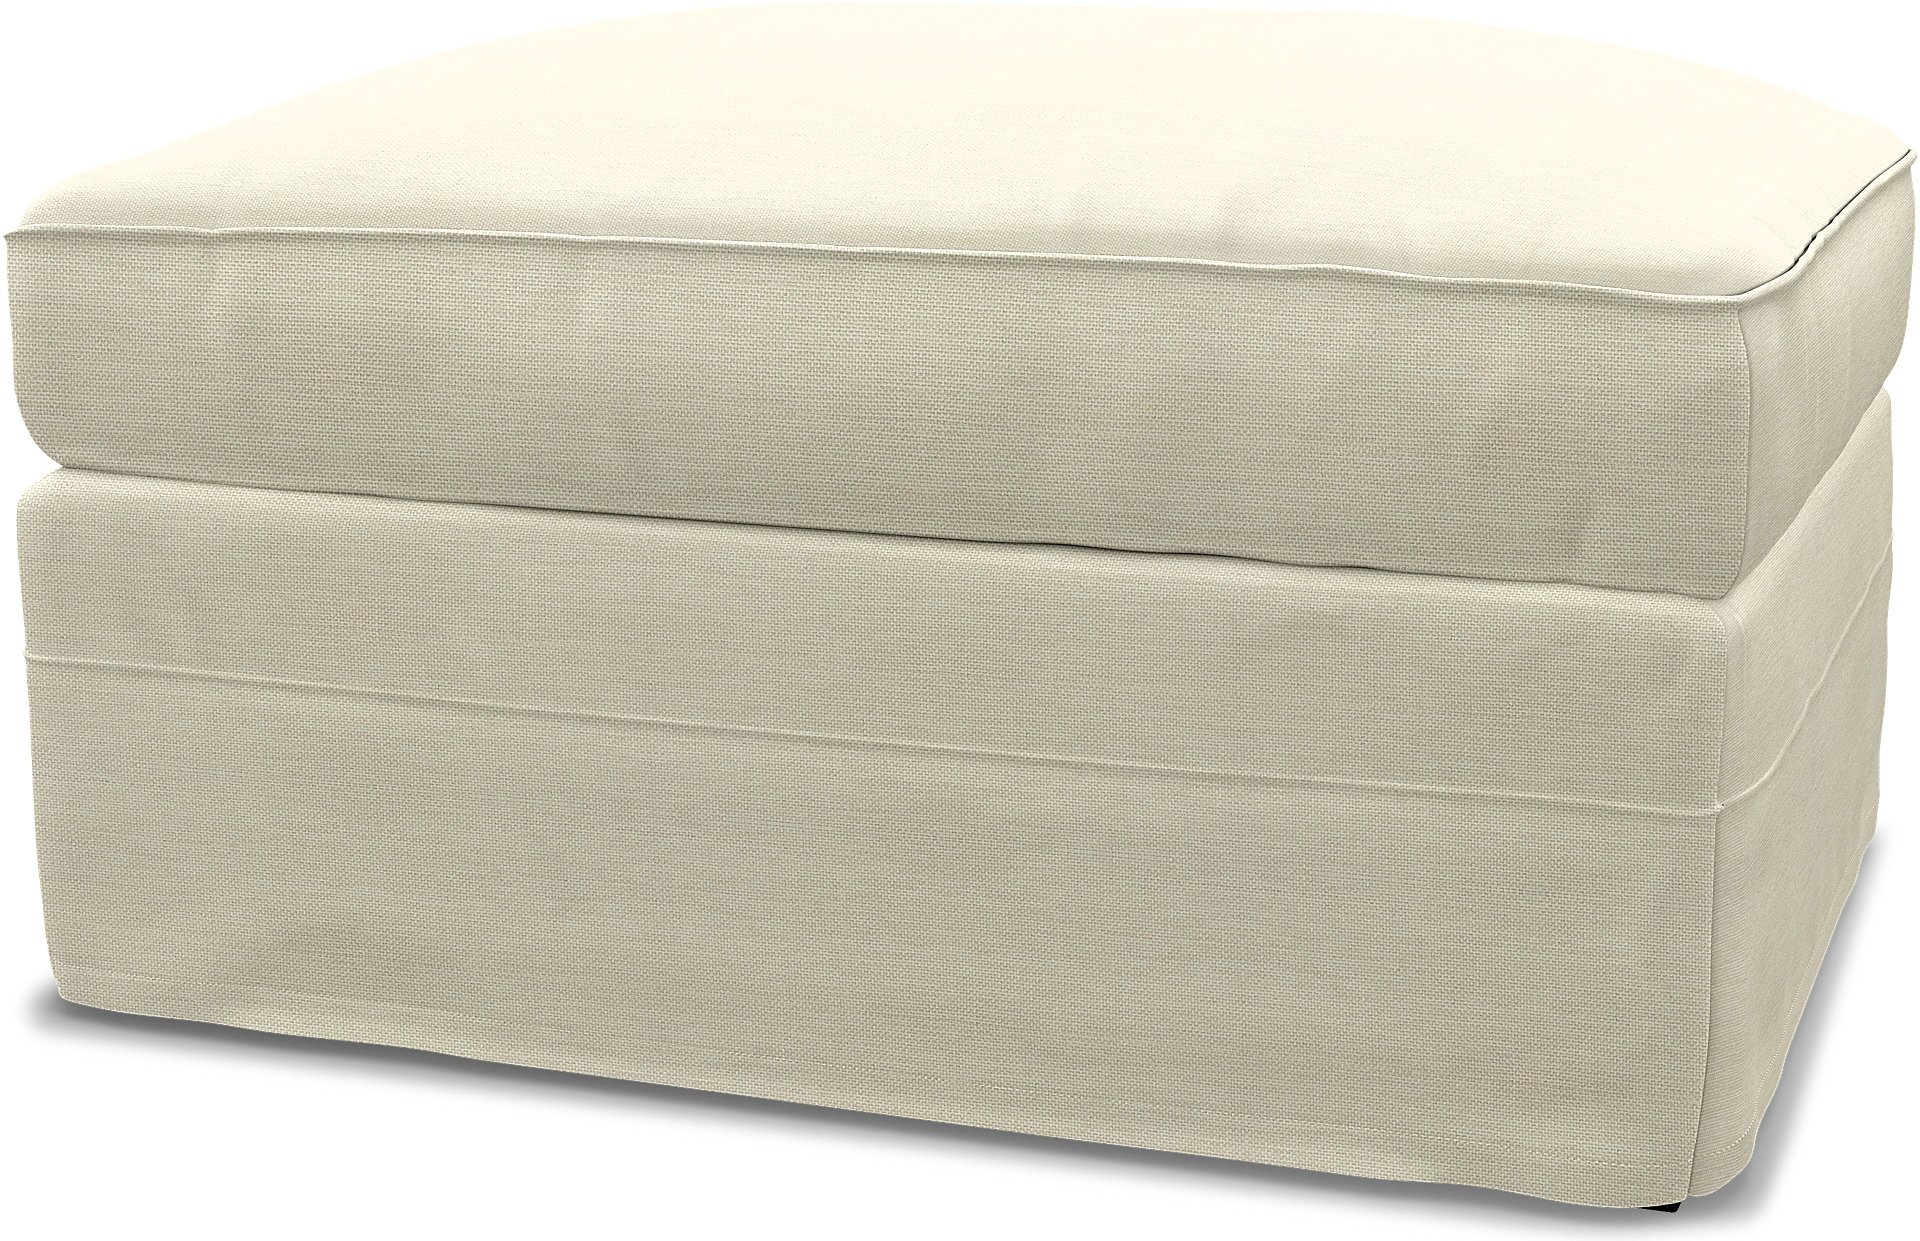 IKEA - Gronlid Footstool with Storage Cover, Sand Beige, Cotton - Bemz